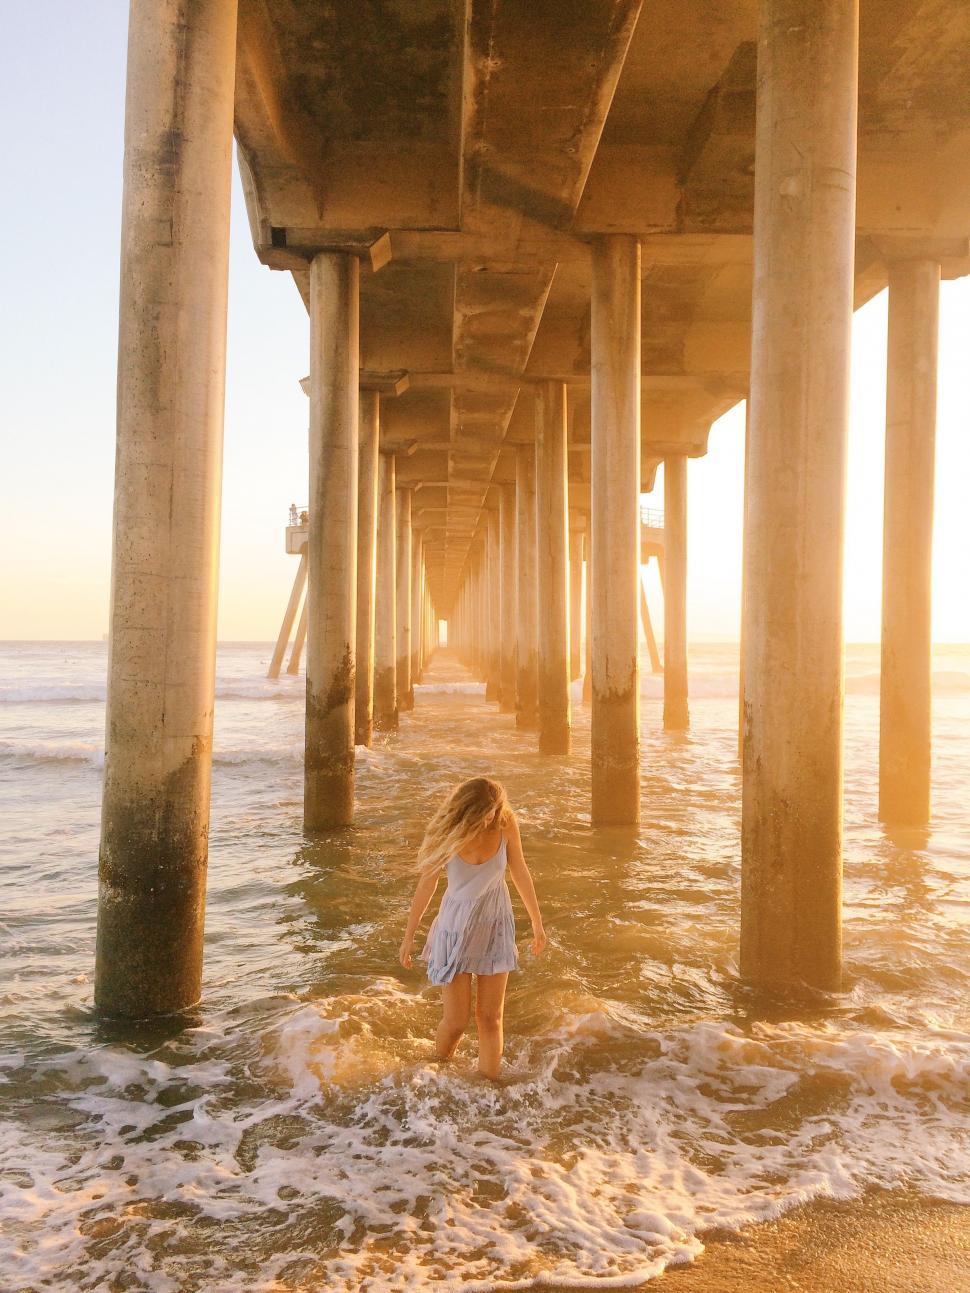 Free Image of Girl Standing Under a Pier in Water 